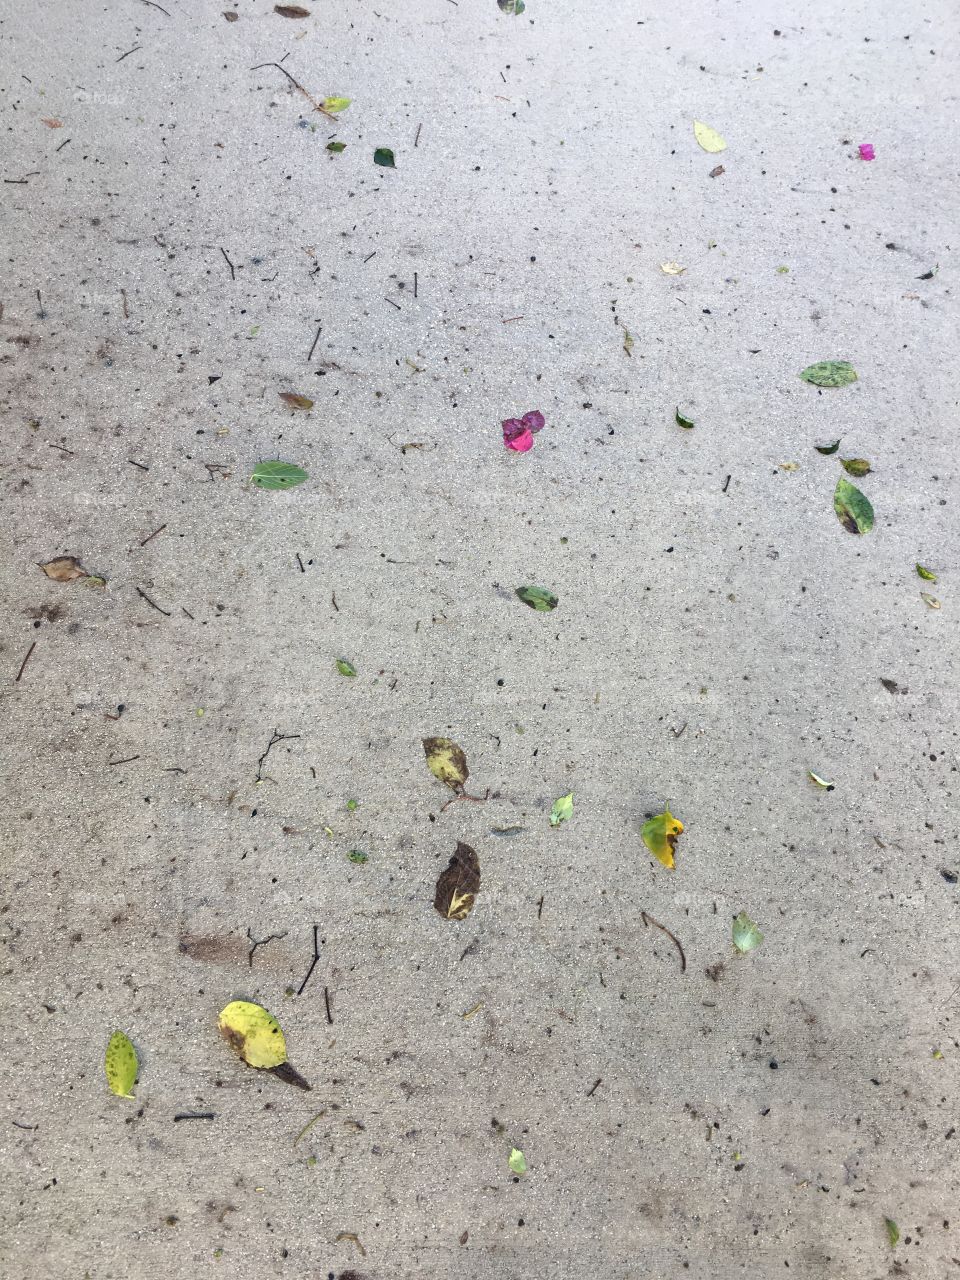 Petals and leaves that fall where they may. Covering a footpath with its delicacy, it’s softness. It lights the way for happiness and peace. With nature around, there’s nothing to fear. The earth and the world support you here. 